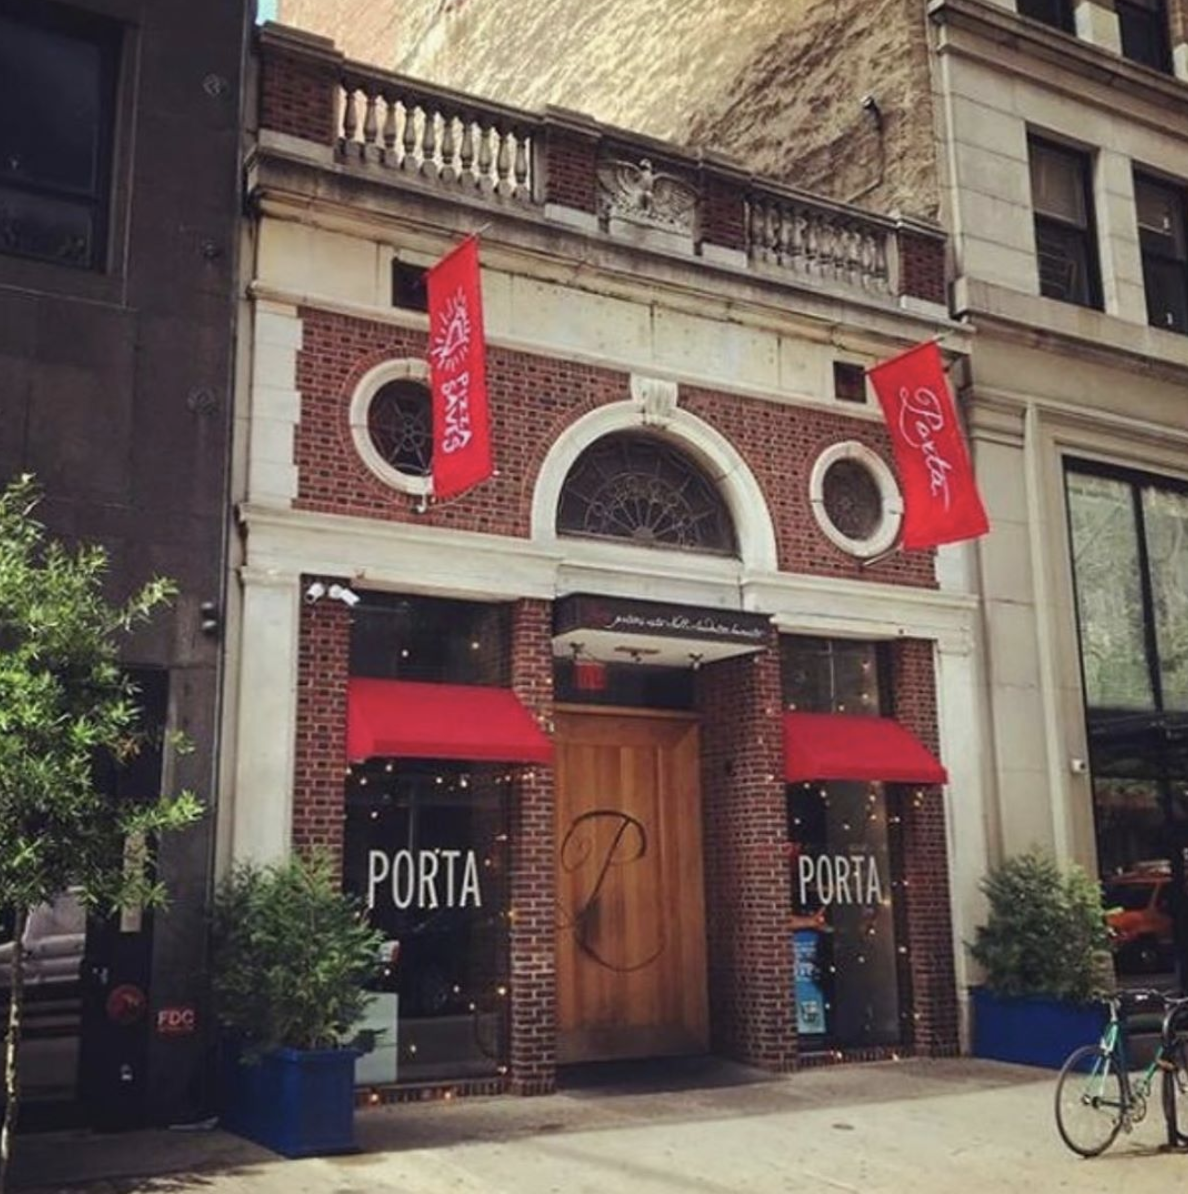 Porta Philly Is Taking Heat For Laying Off Employees Via Instagram and ...